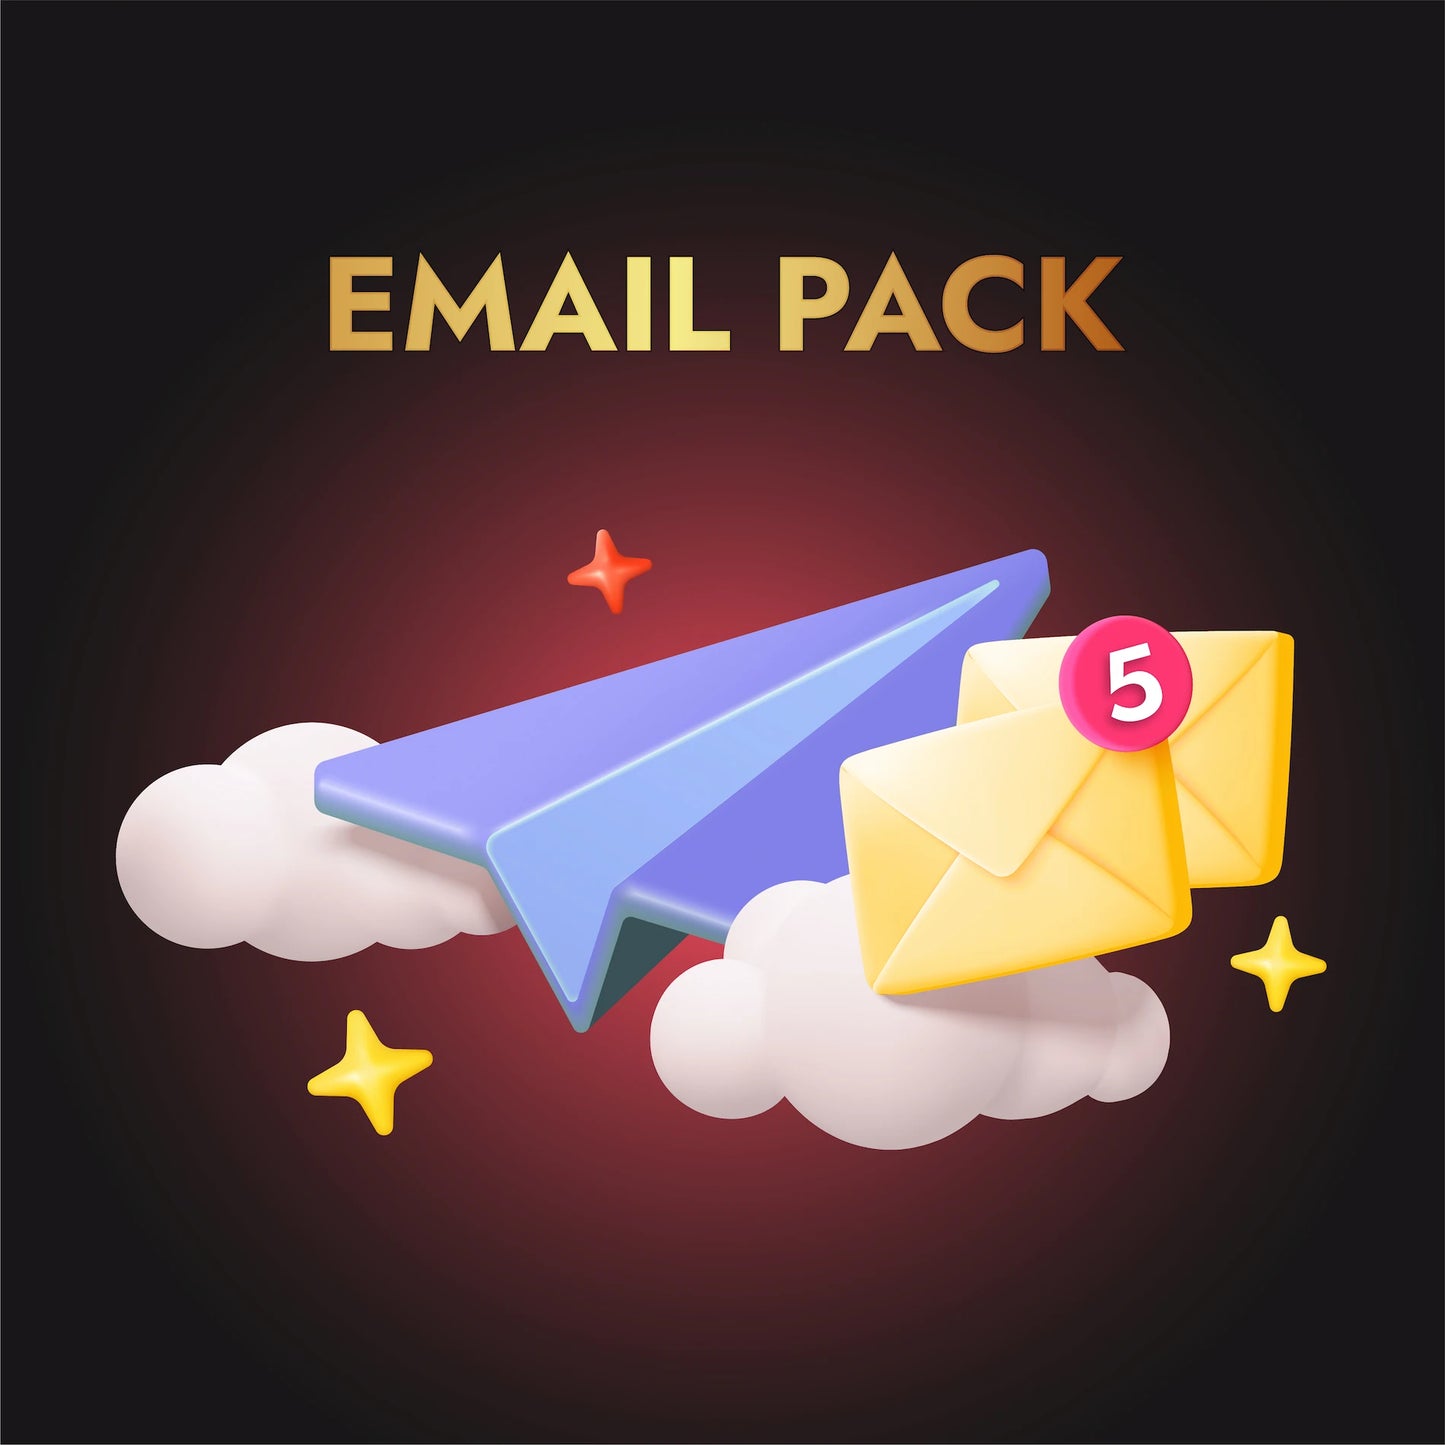 Email Pack